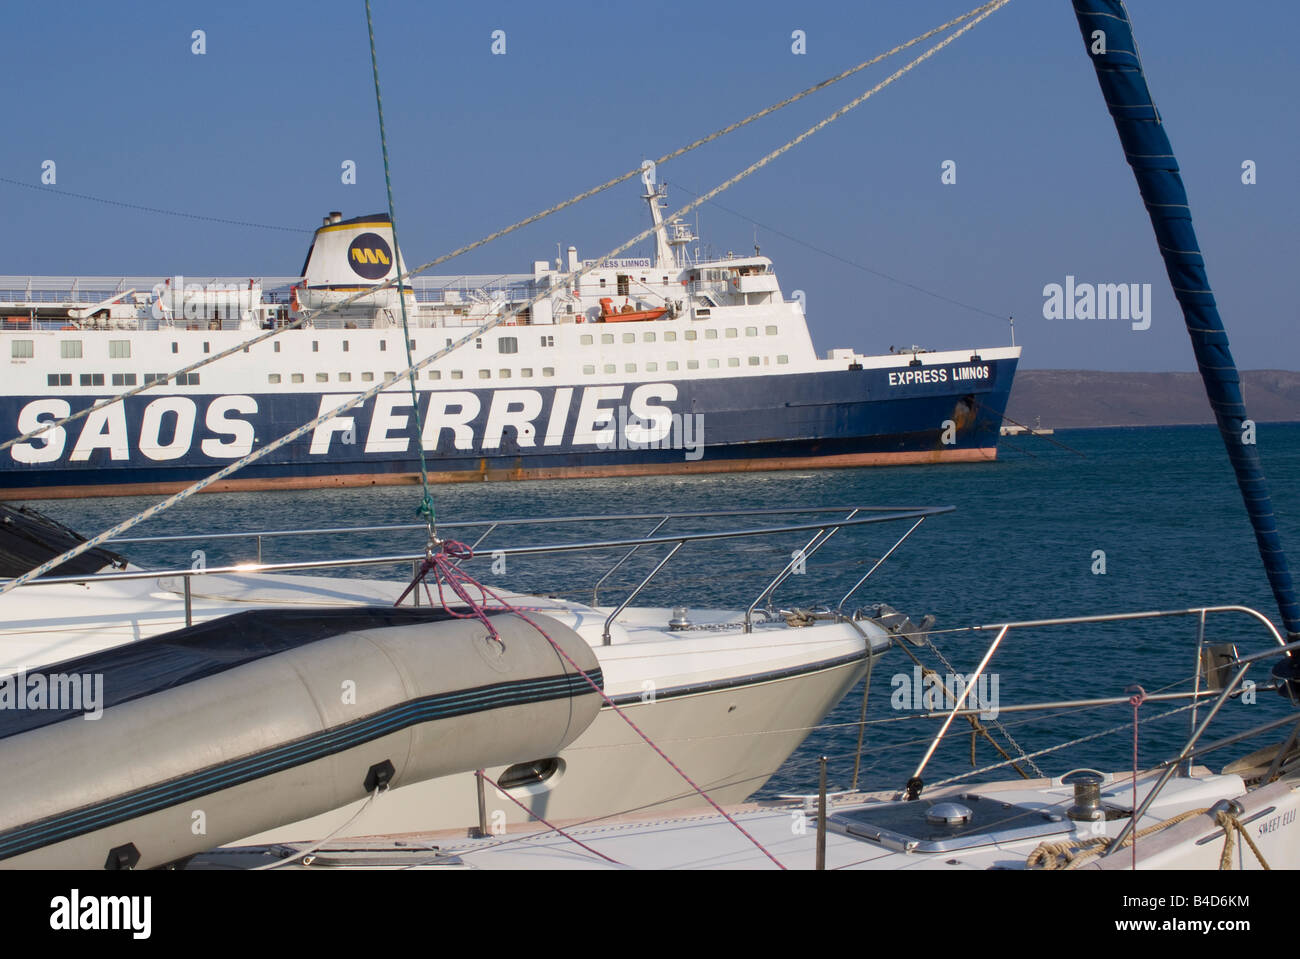 View of Car and Passenger Ferry Through the Rigging of Yachts Moored in Lavrion Town Harbour Greek Mainland Aegean Sea Greece Stock Photo